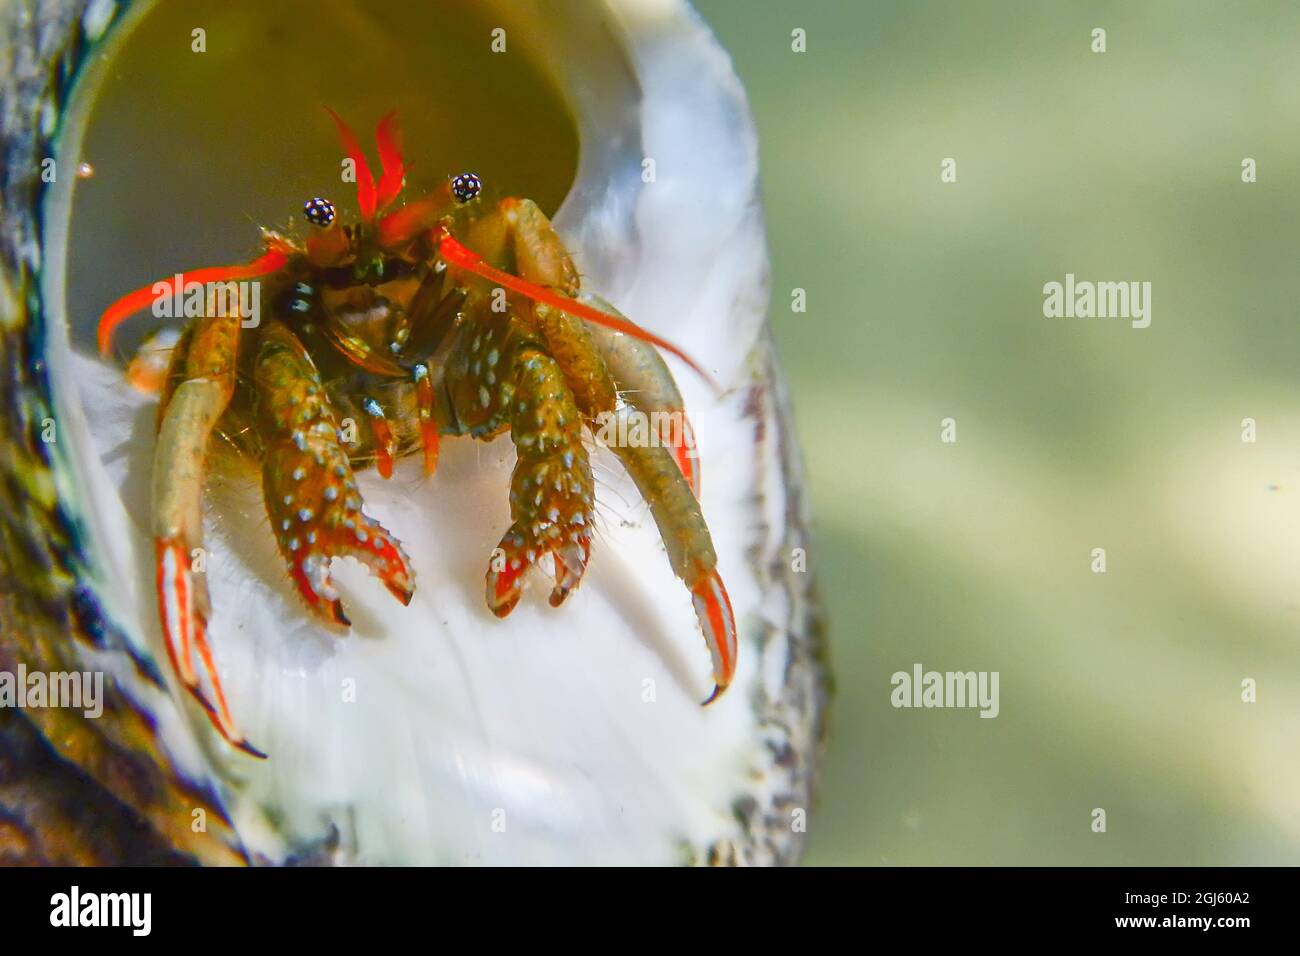 Small funny hermit crab underwater close up. Stock Photo